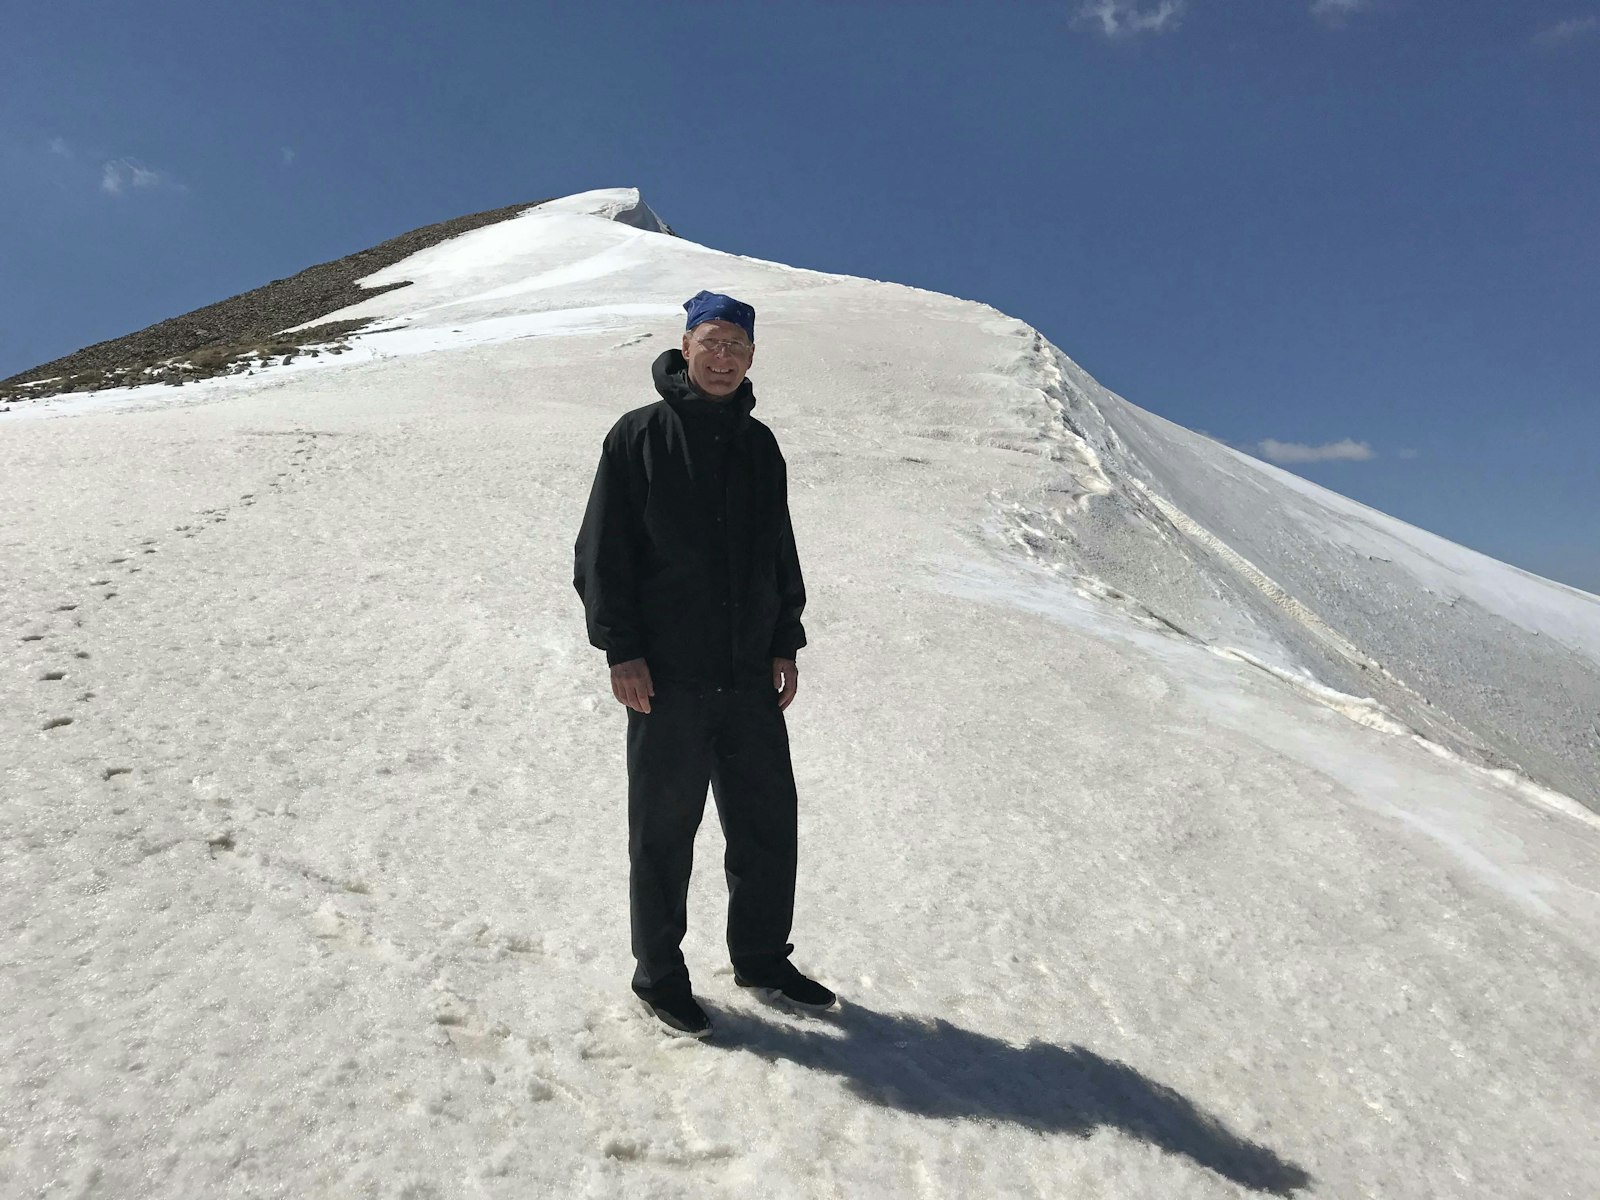 Archbishop Russell is pictured hiking to the summit of Mount Sulbus in the Yayladere district of Bingöl Province, Turkey, a height of 12,740 feet above sea level.